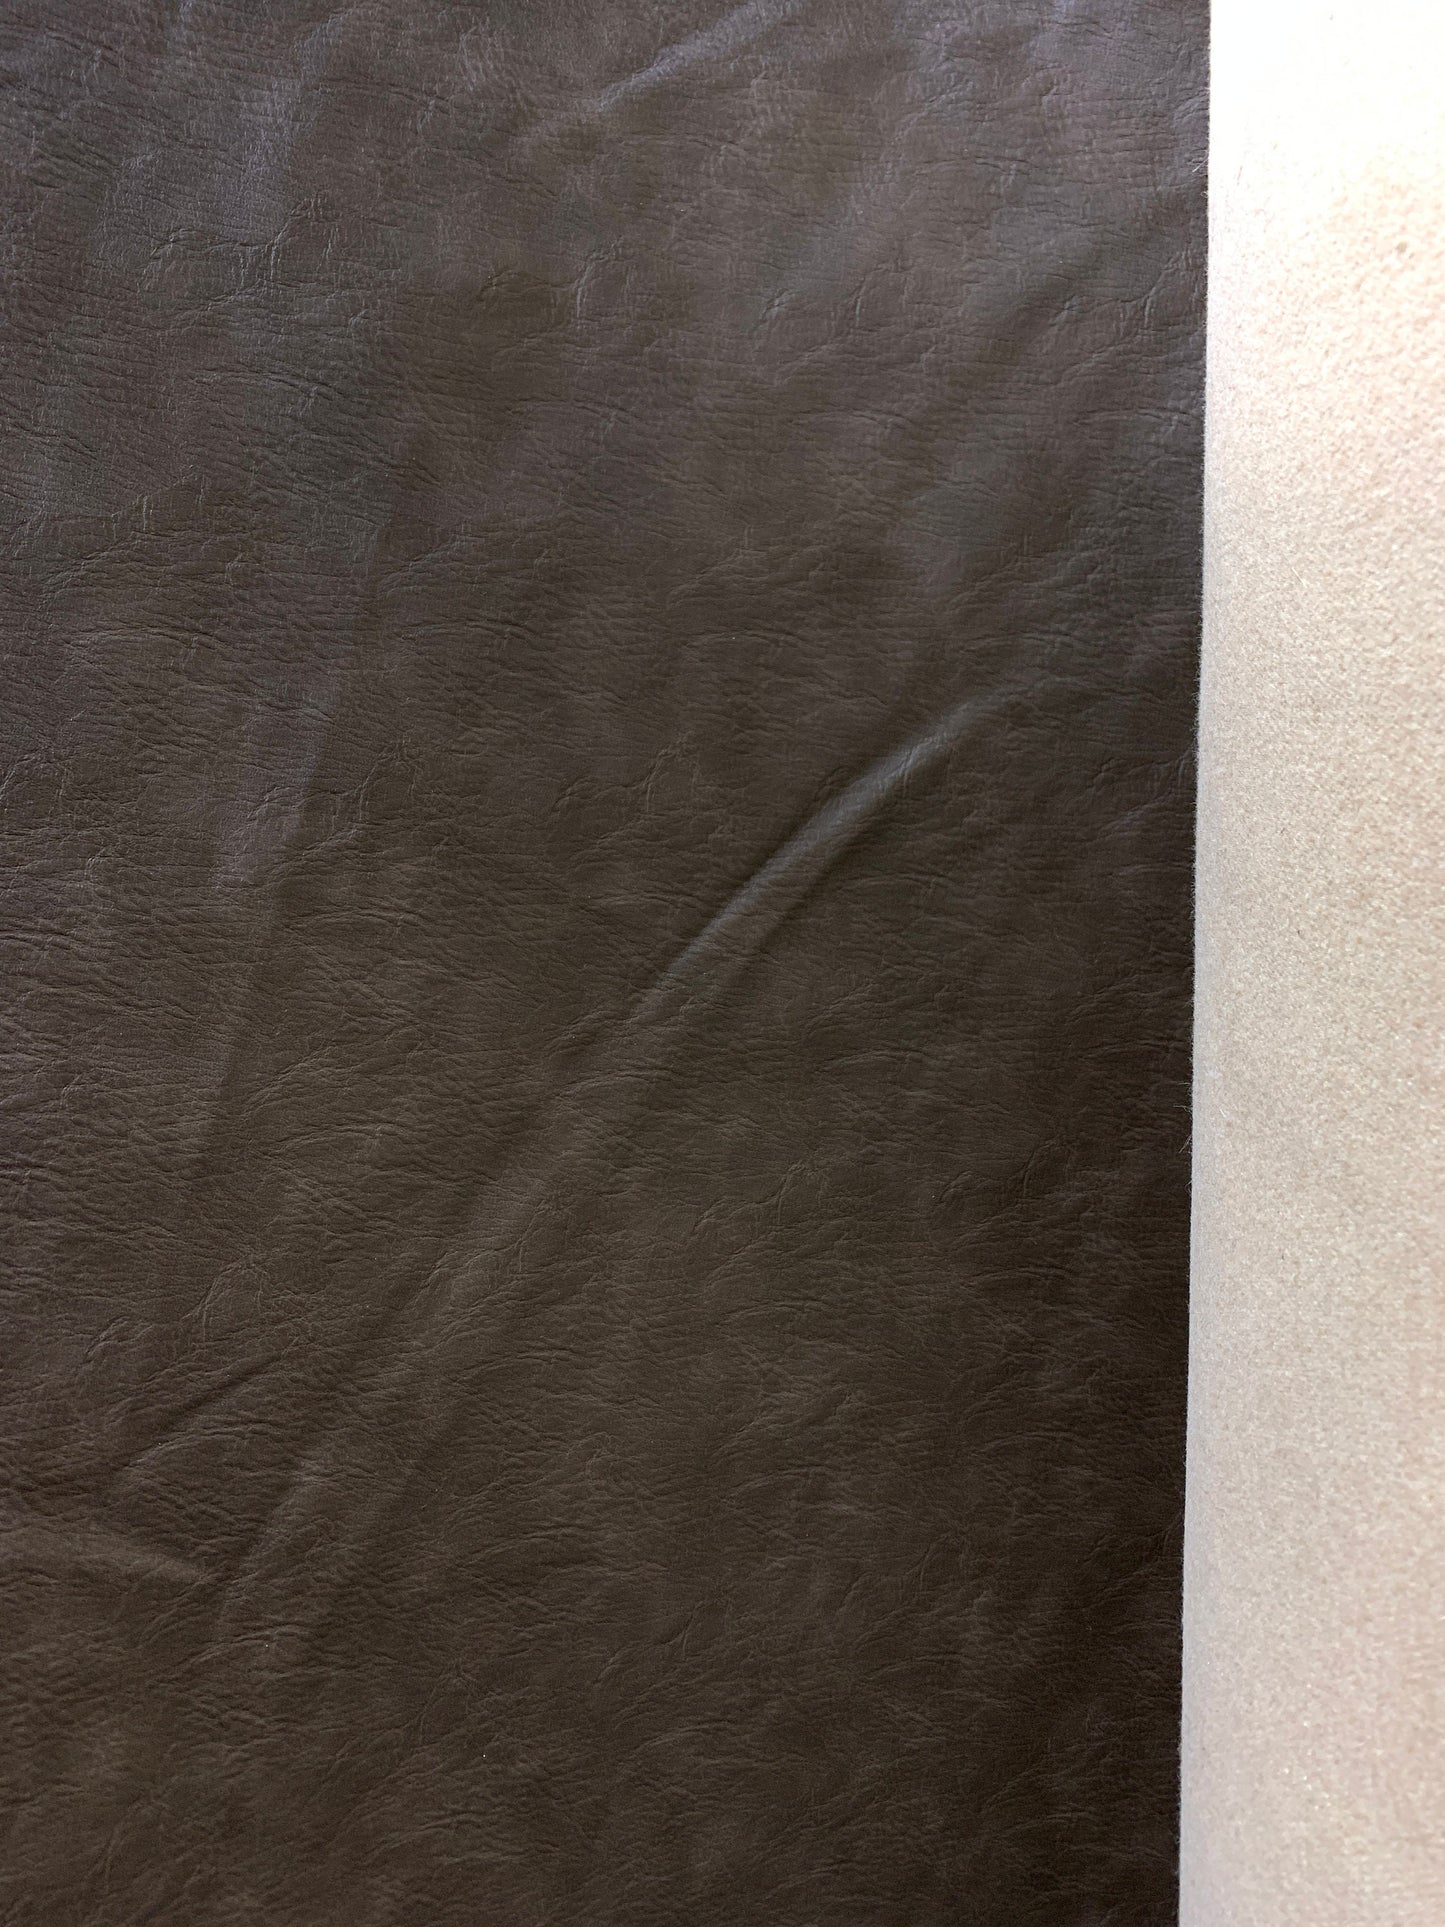 BROWN Faux Leather Vinyl Upholstery Fabric (55 in.) Sold By The Yard